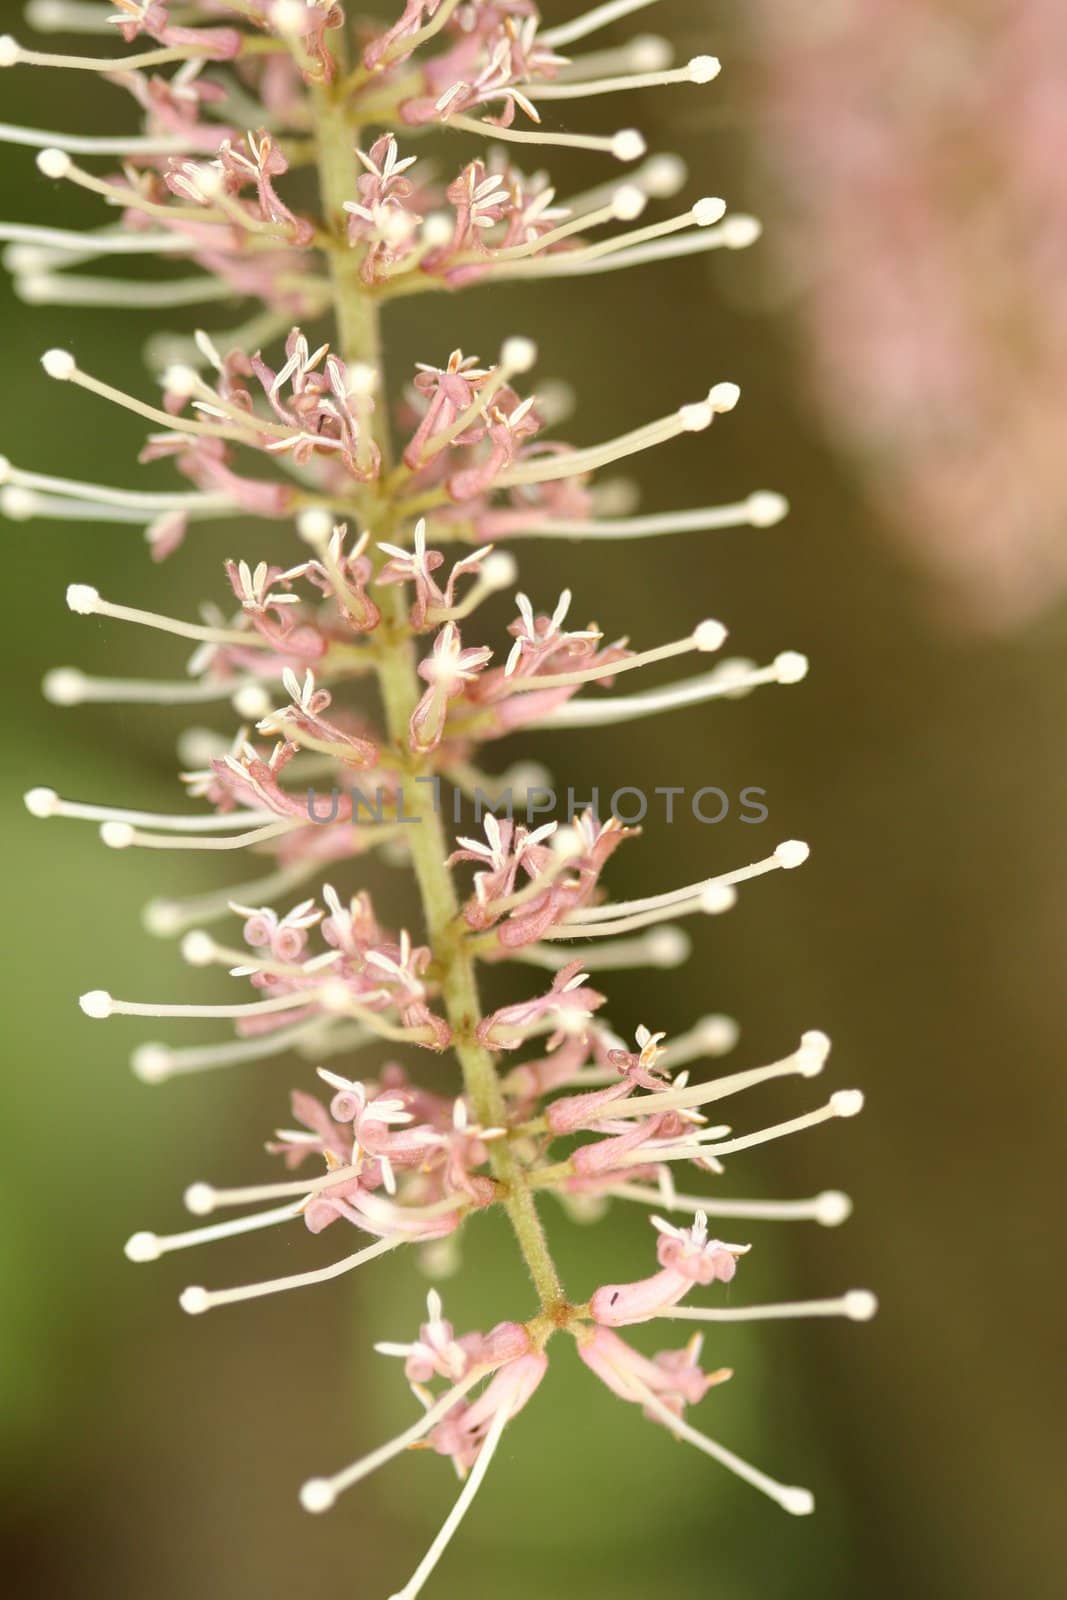 Closeup of a macadamia flower.  The flower cluster is a raceme with 200 or more  flowers, that have no petals, but four petaloid sepals. Flowers are pink on M. tetraphylla and creamy white on M. integrifolia. Each flower has four stamens and a pistil with an ovary which contains two ovules. Nut development in macadamia from full flowering (anthesis) to kernel maturity takes about 30 weeks.  Shallow dof to blur background.